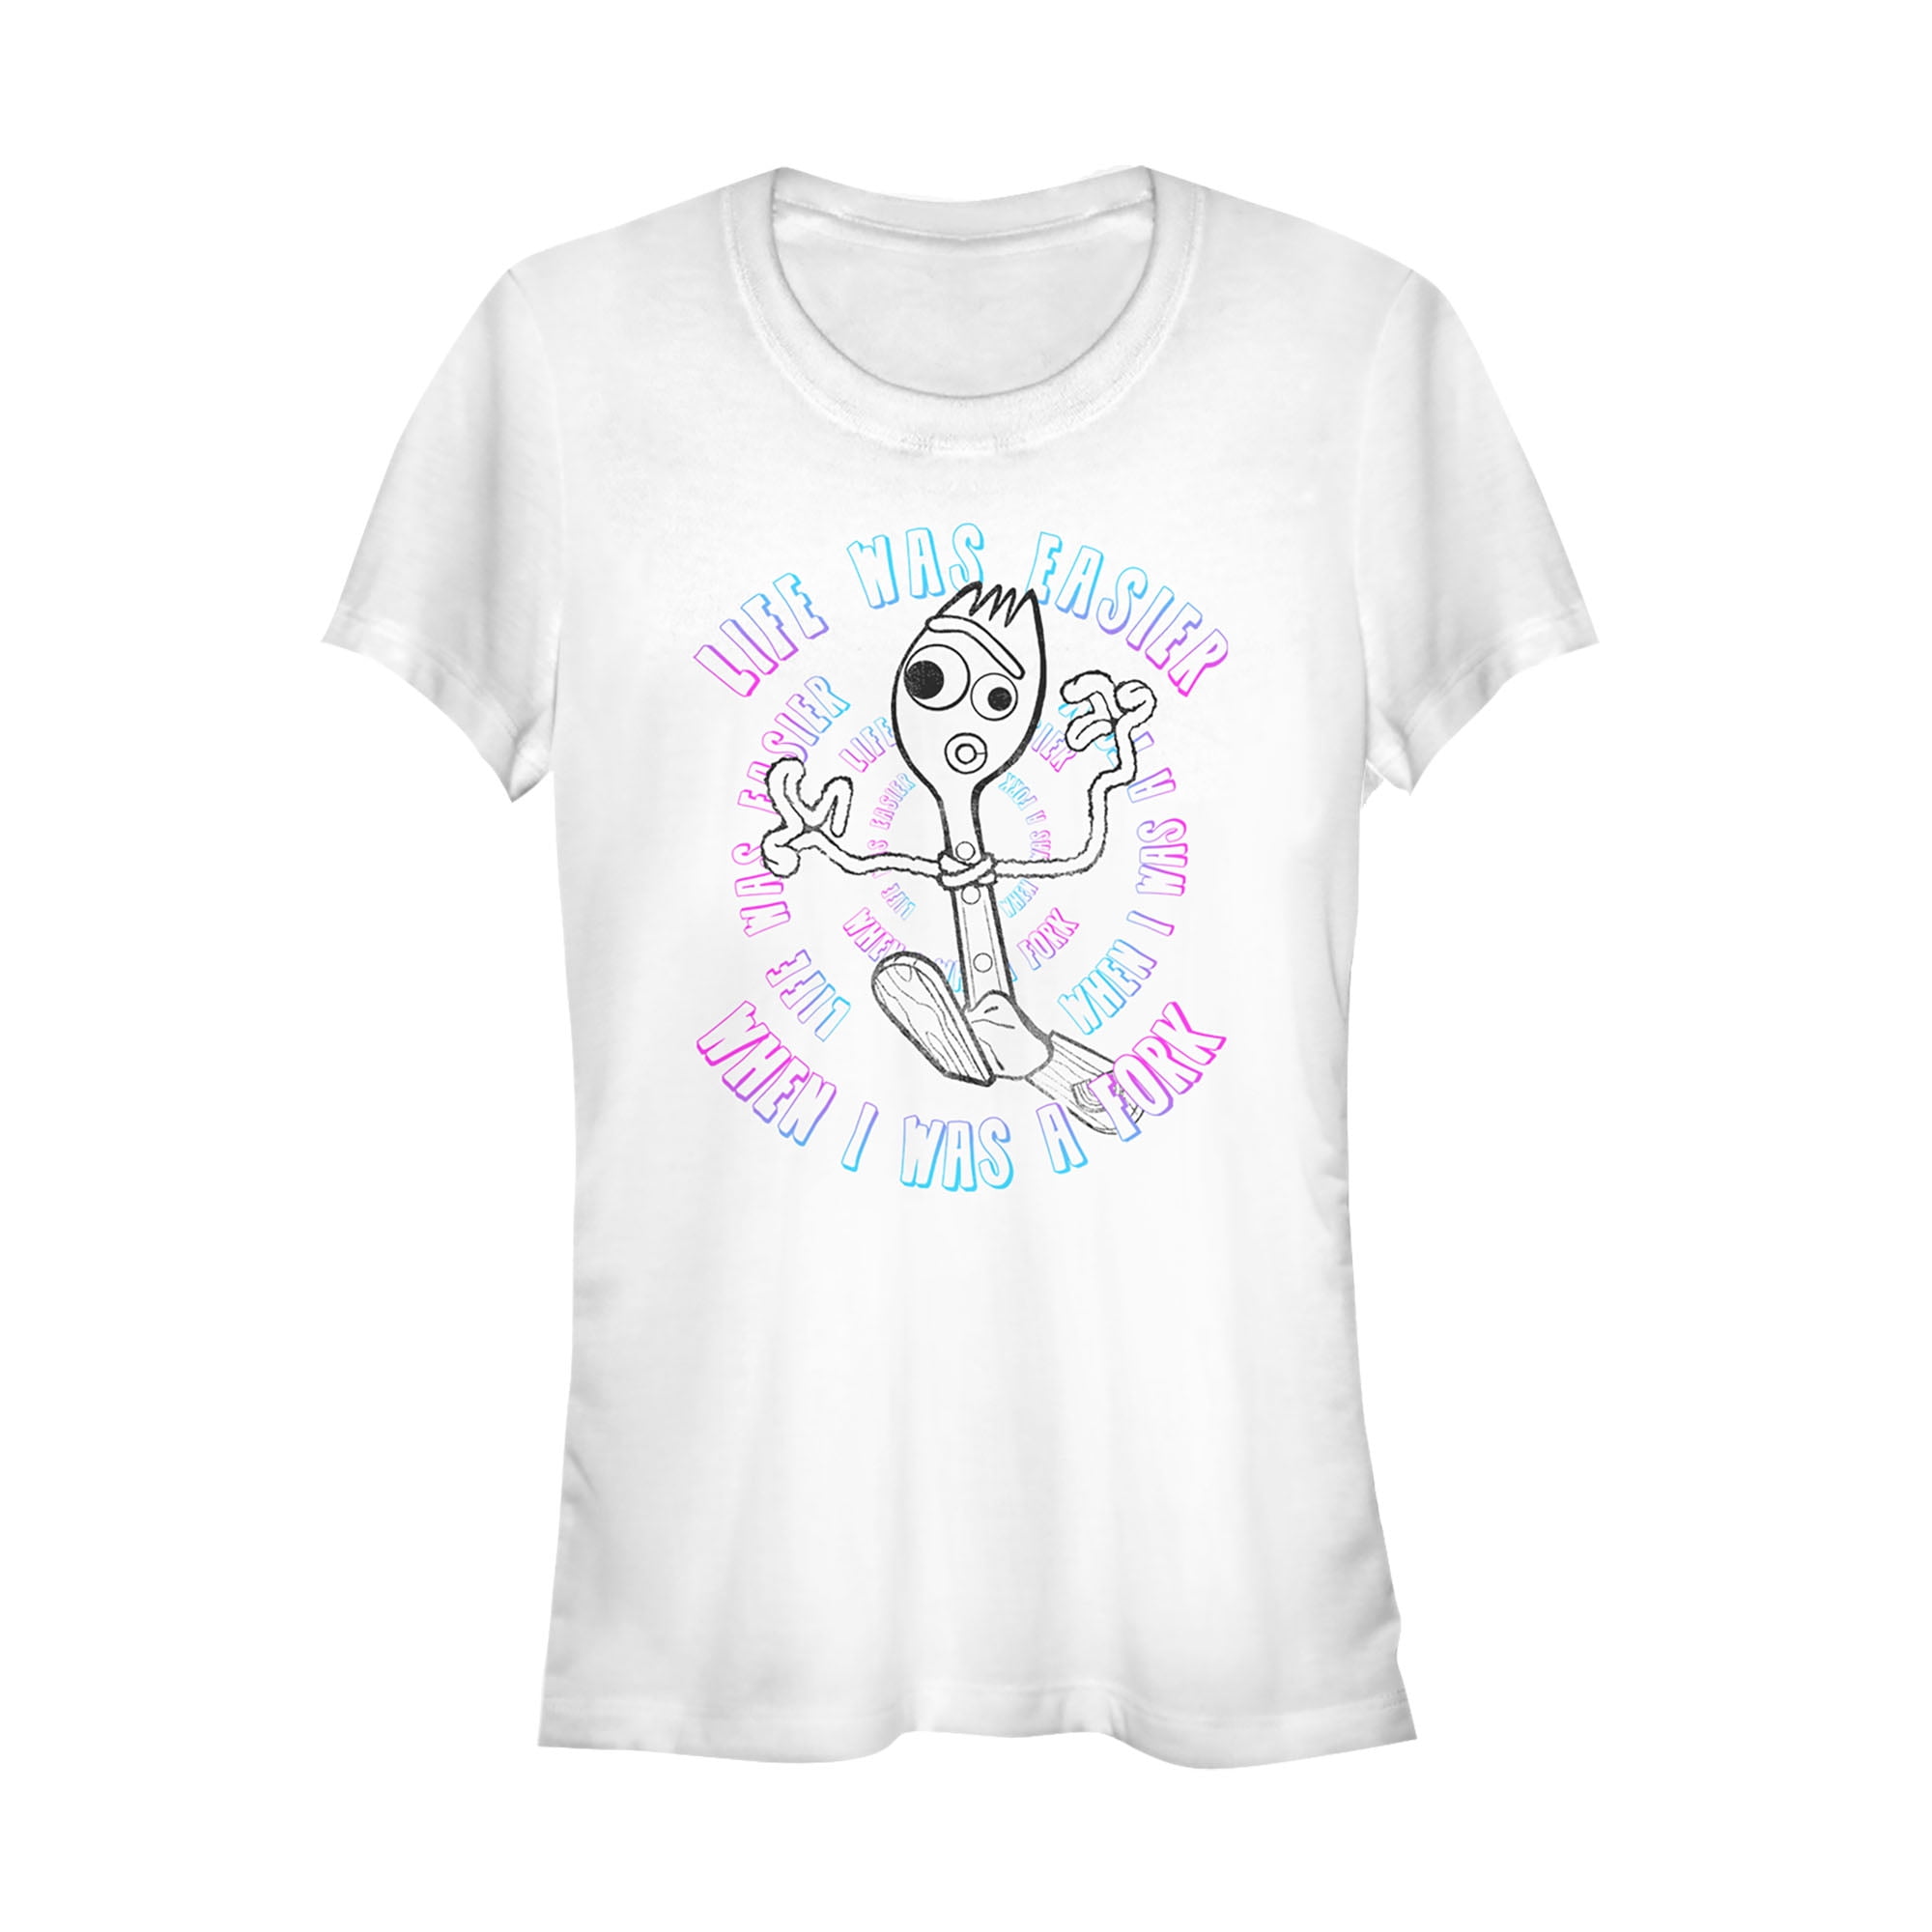 Toy Story Womens 4 Forky Life was Easy T-Shirt